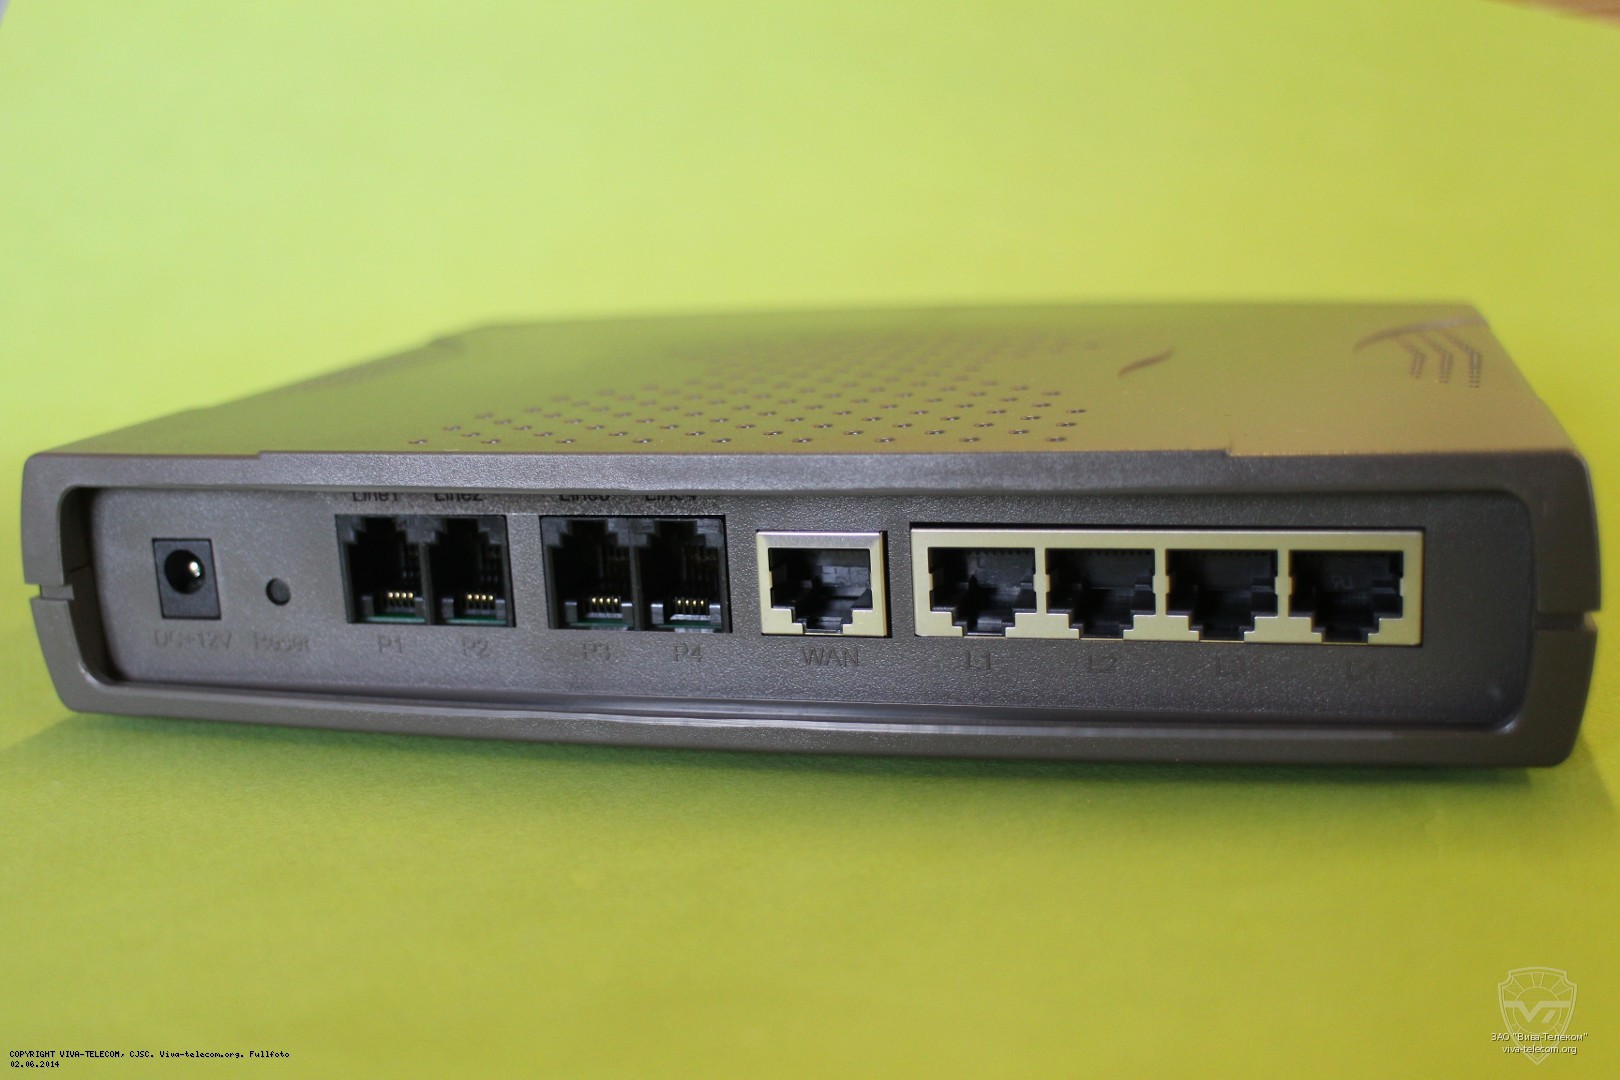   VoIP  D-Link DVG-6004s